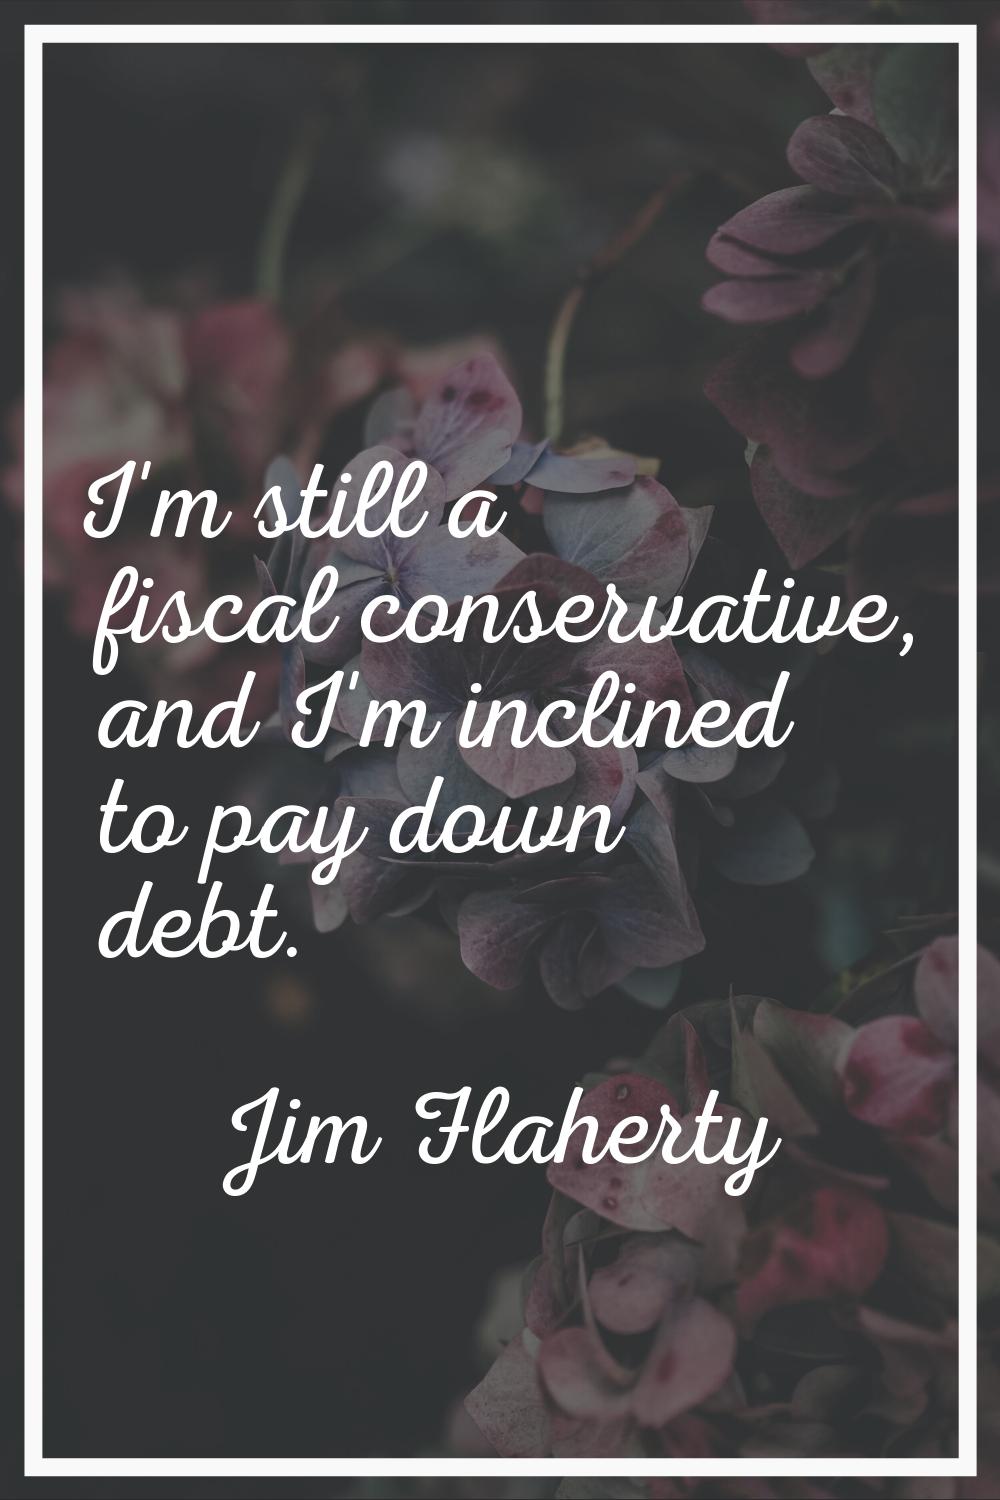 I'm still a fiscal conservative, and I'm inclined to pay down debt.